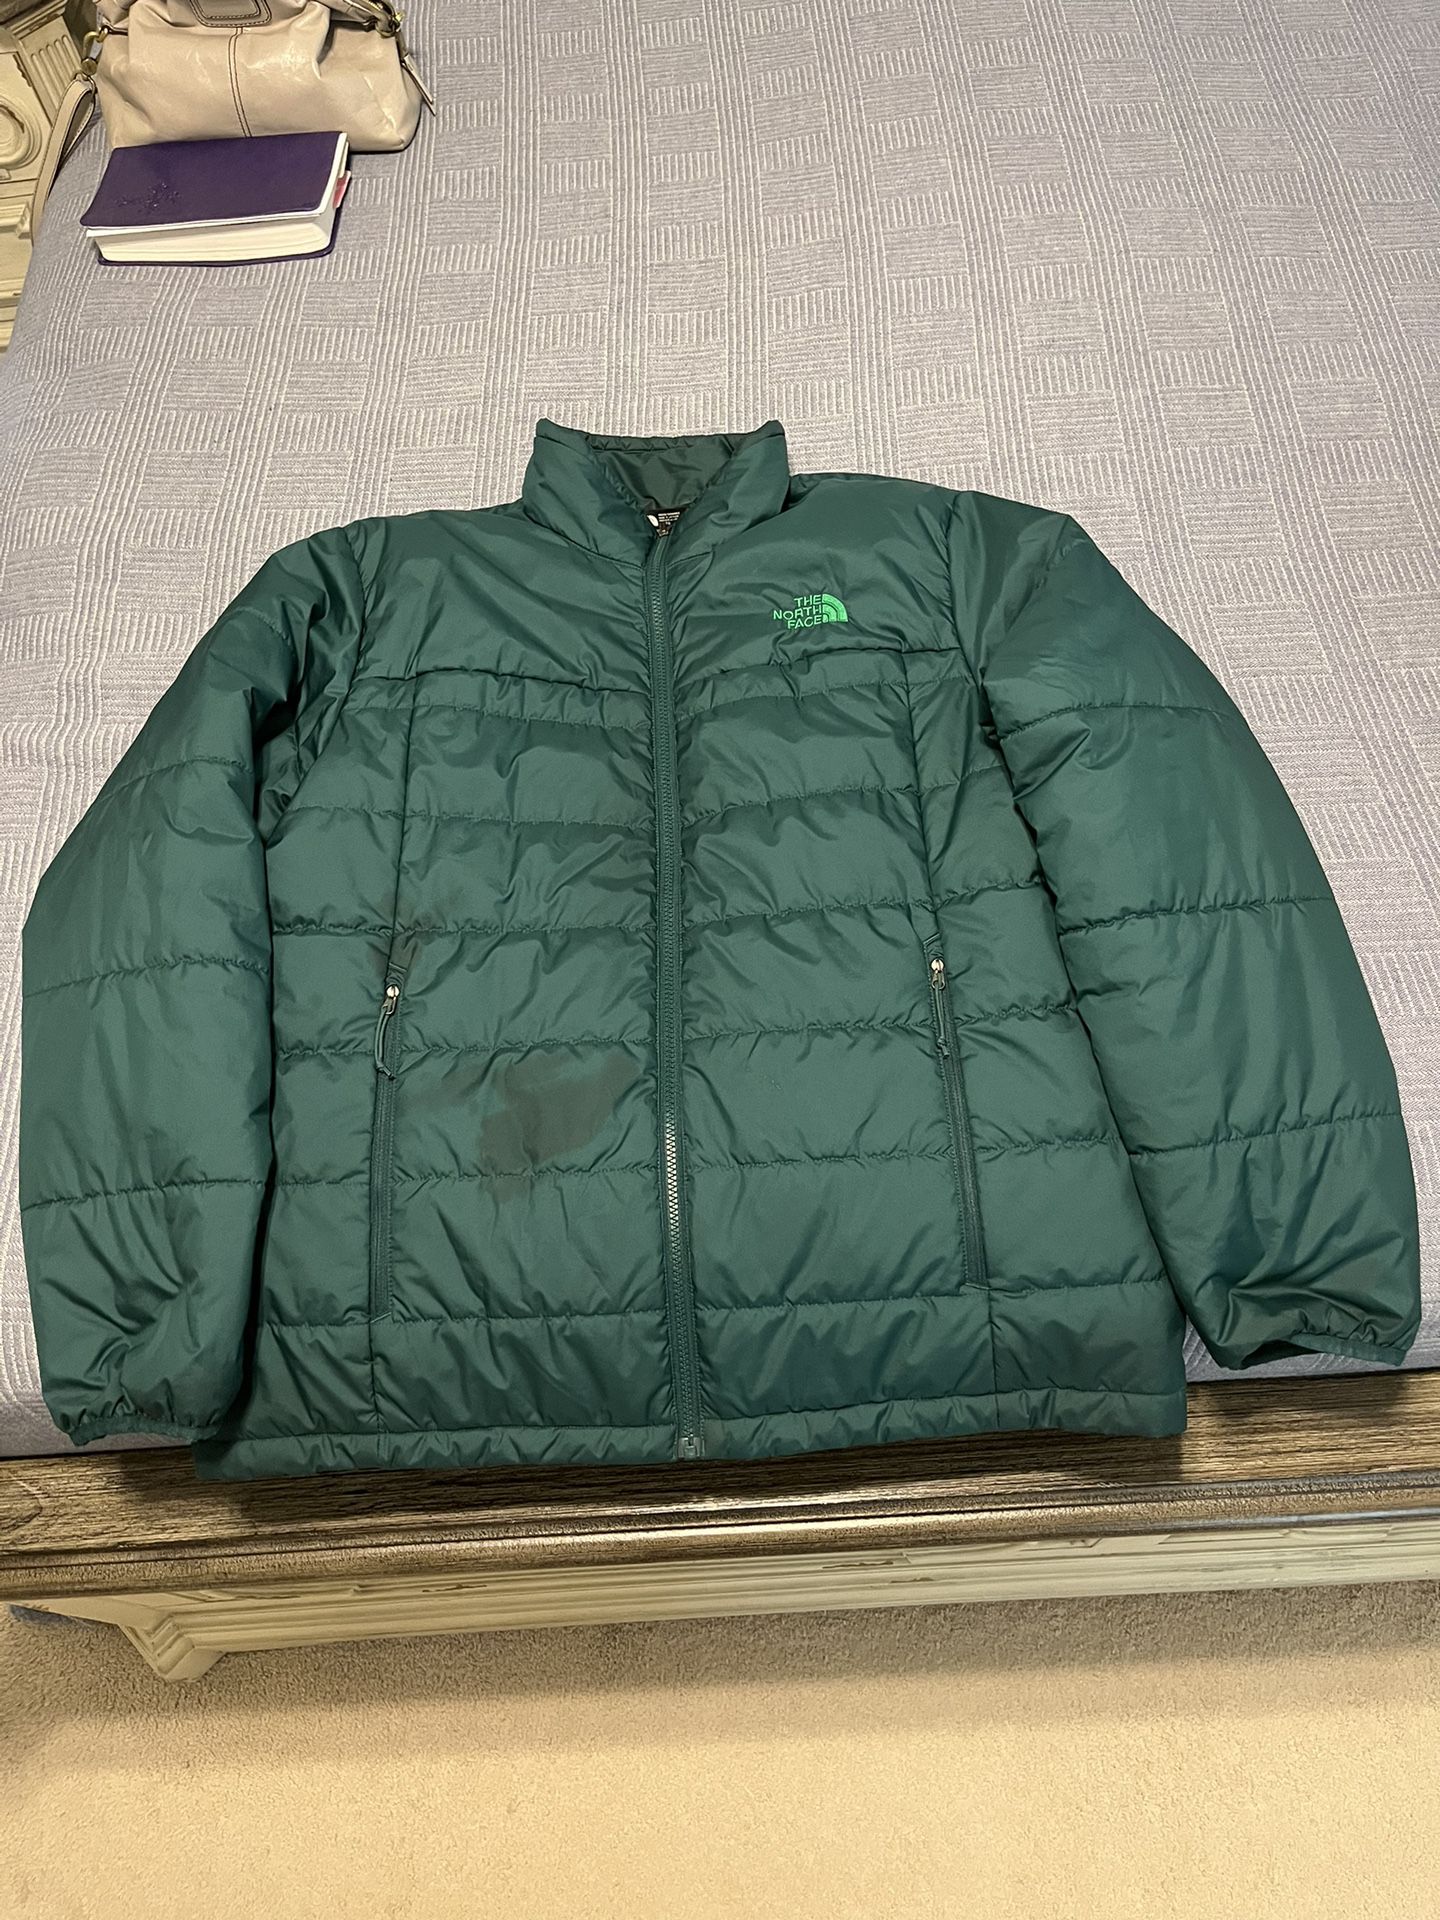 North Face Tri-Climate Jacket